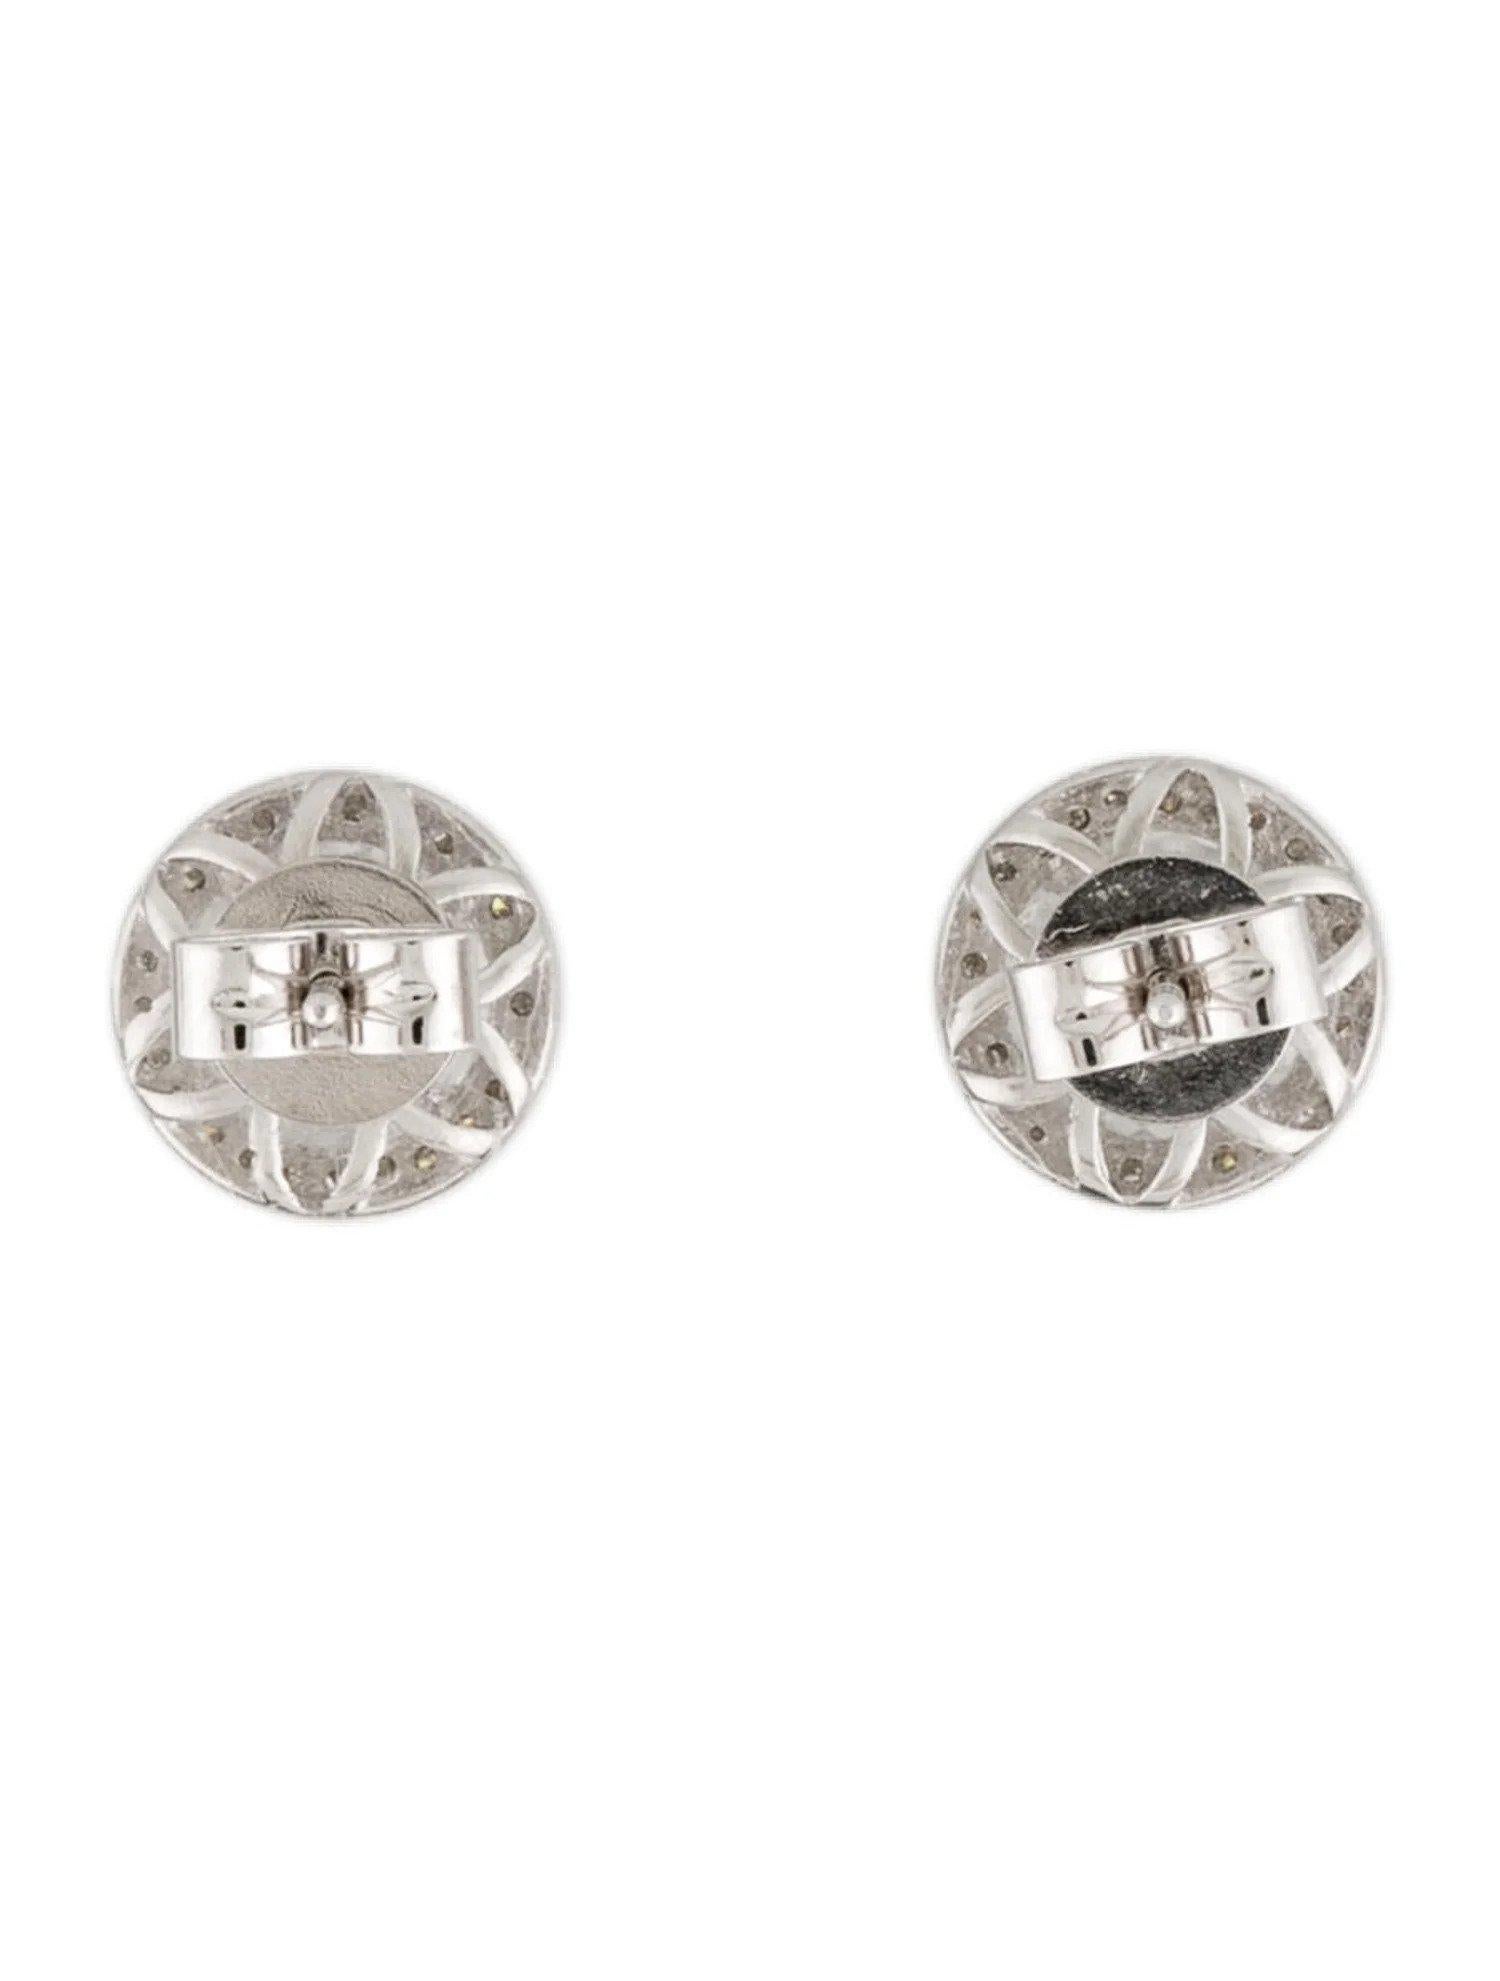 2.50 Carat Round White Topaz & Diamond White Gold Stud Earrings  In New Condition For Sale In Great Neck, NY